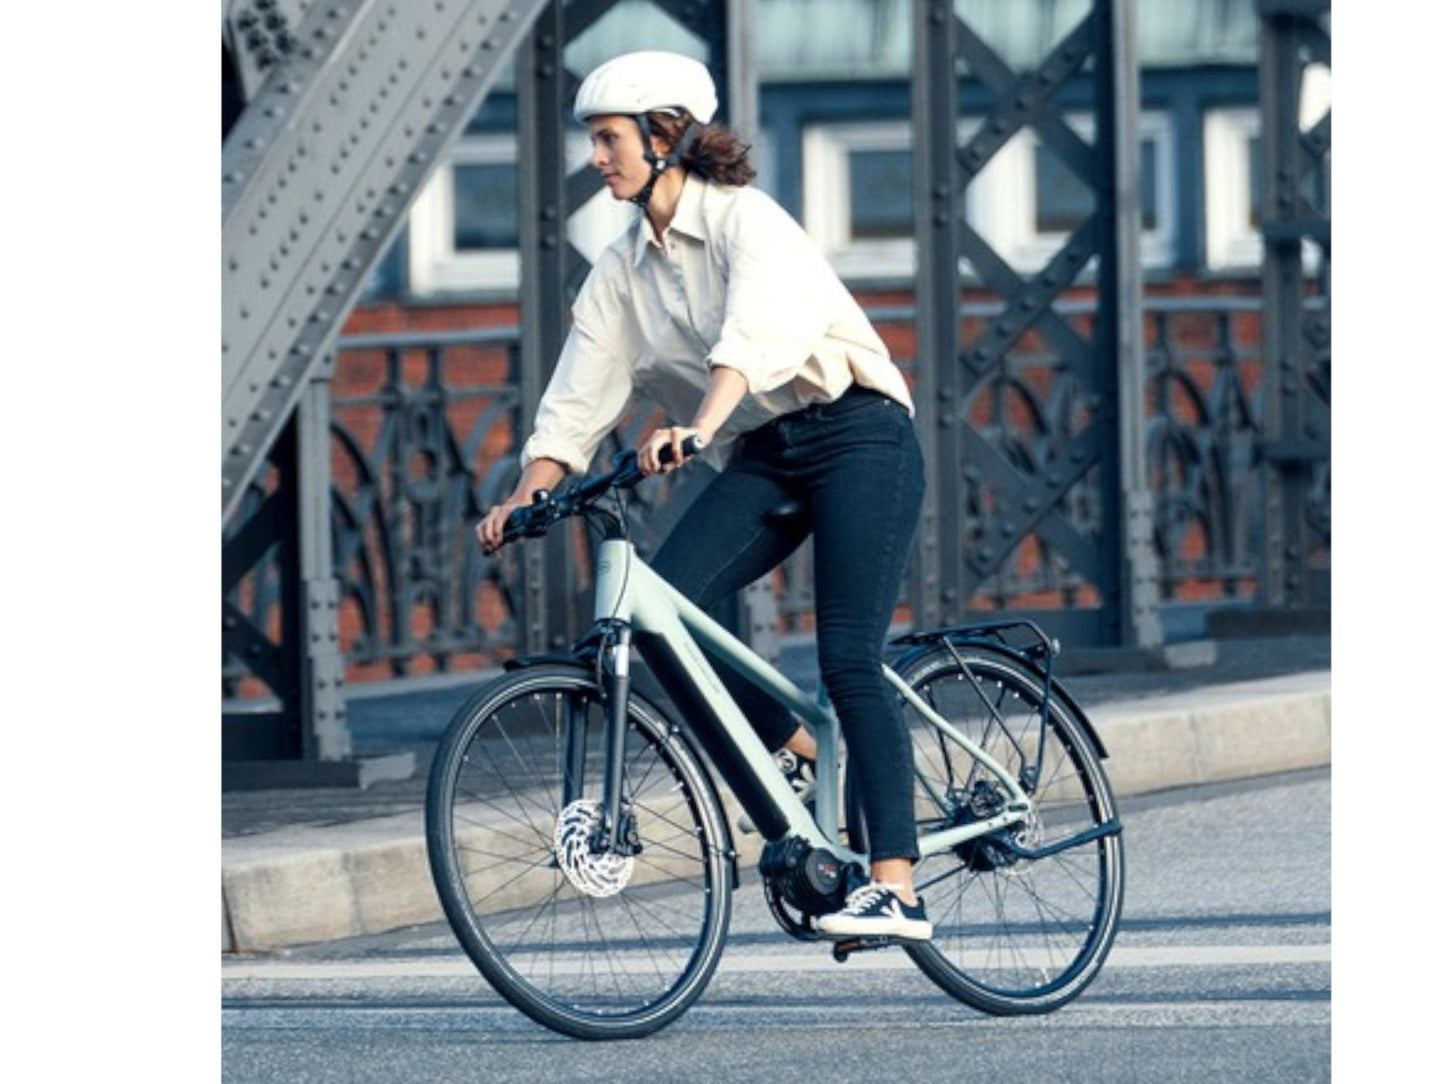 Riese and Muller Roadster Mixte Vario eMTB hardtail woman commuting on city streets